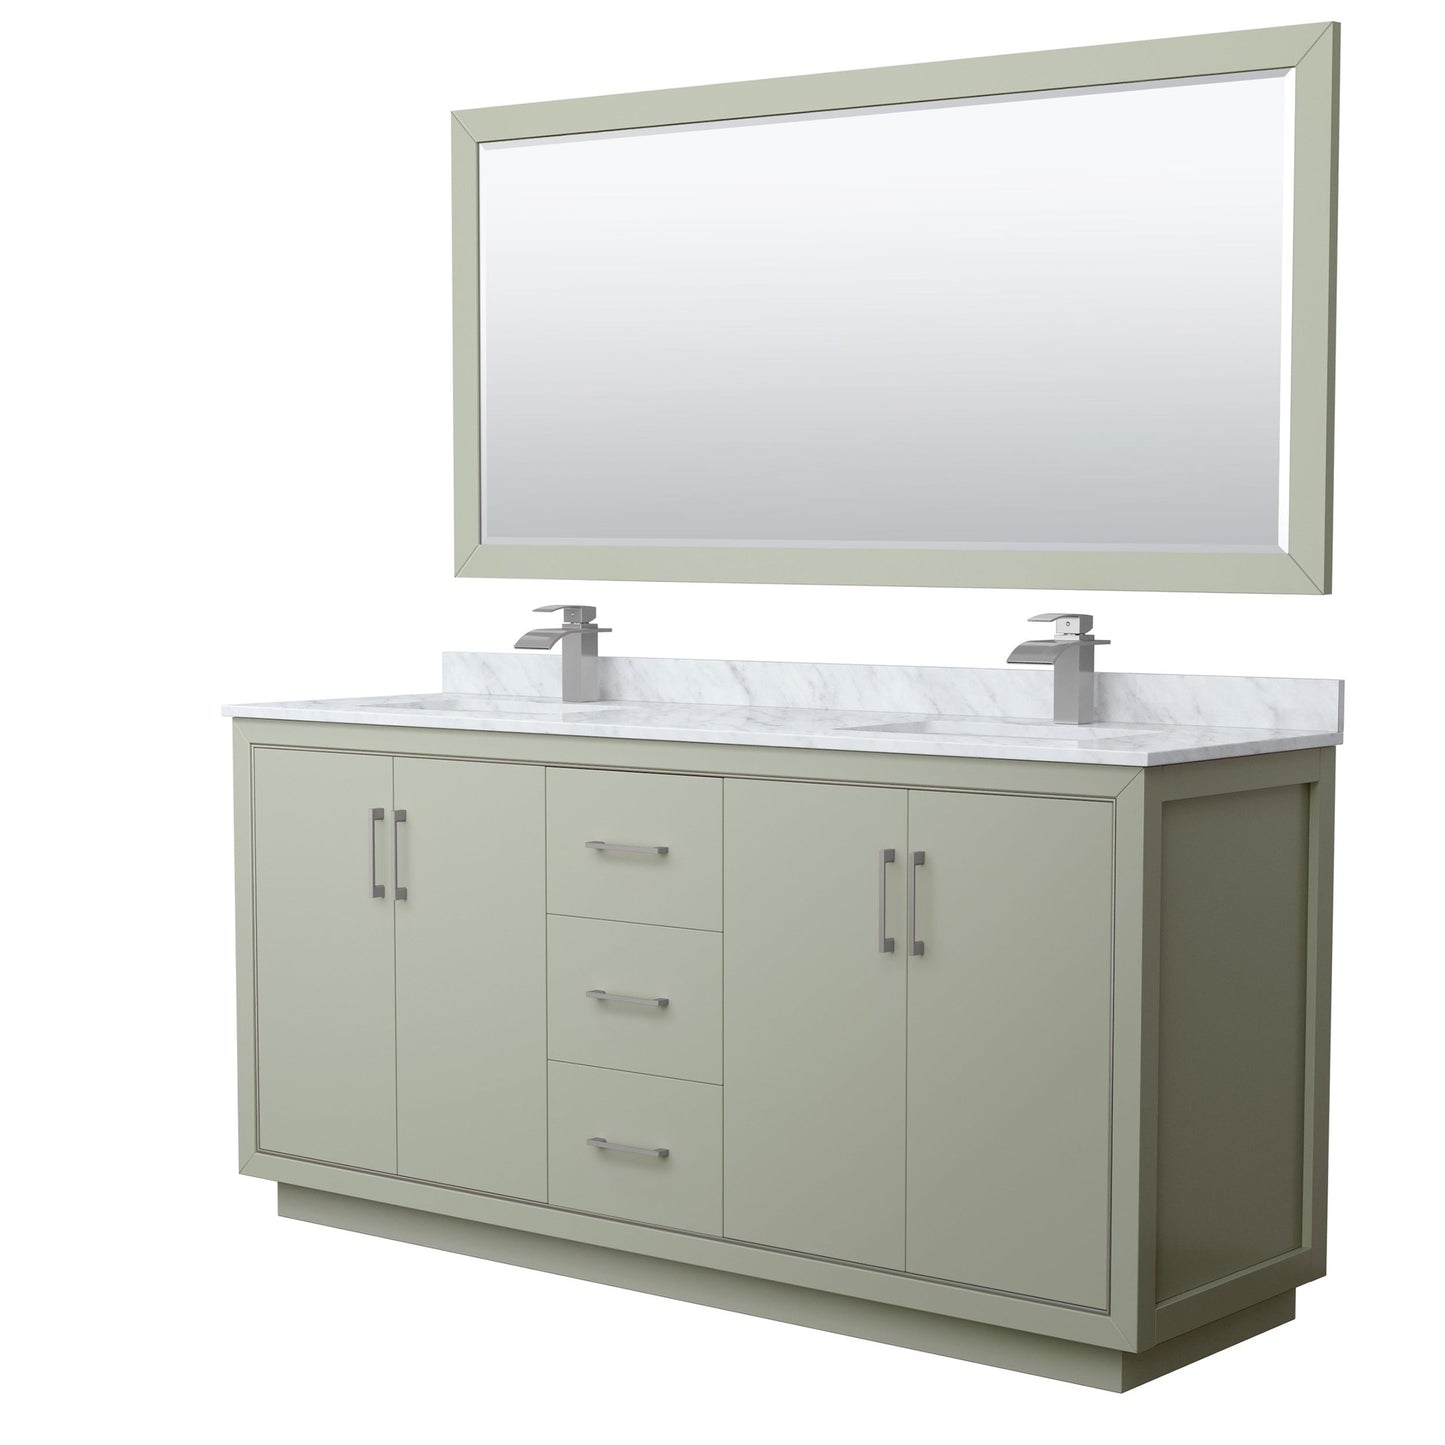 Wyndham Collection Icon 72" Double Bathroom Vanity in Light Green, White Carrara Marble Countertop, Undermount Square Sinks, Brushed Nickel Trim, 70" Mirror